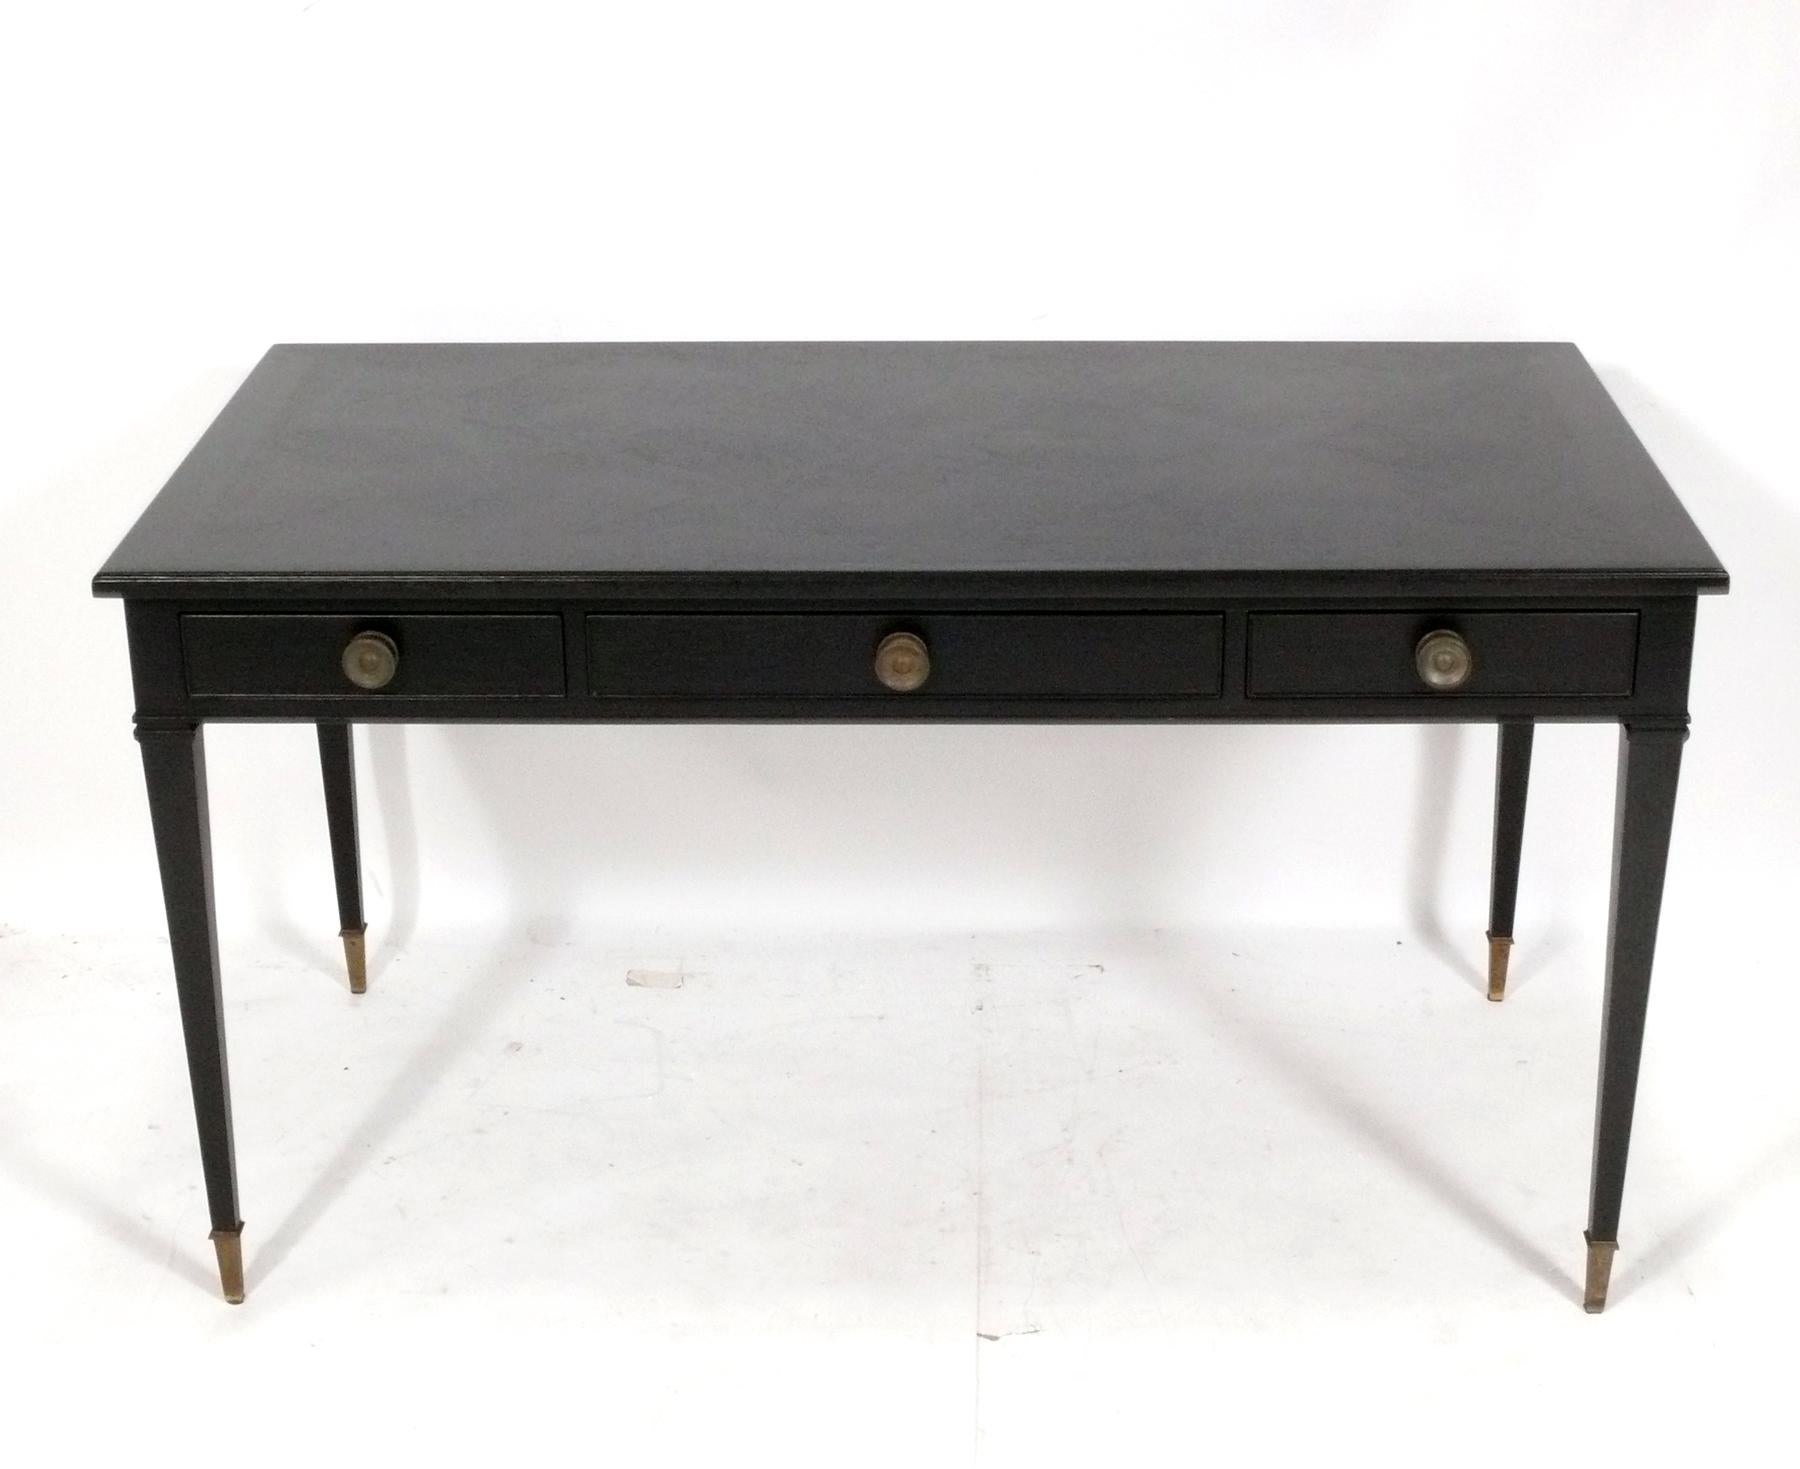 Elegant Black Stained French Style Bureau Plat or Desk by Kittinger, American, circa 1960s. It has recently been refinished in a black stain that still allows you to see the beautiful parquet top. The brass hardware and sabots retain their warm